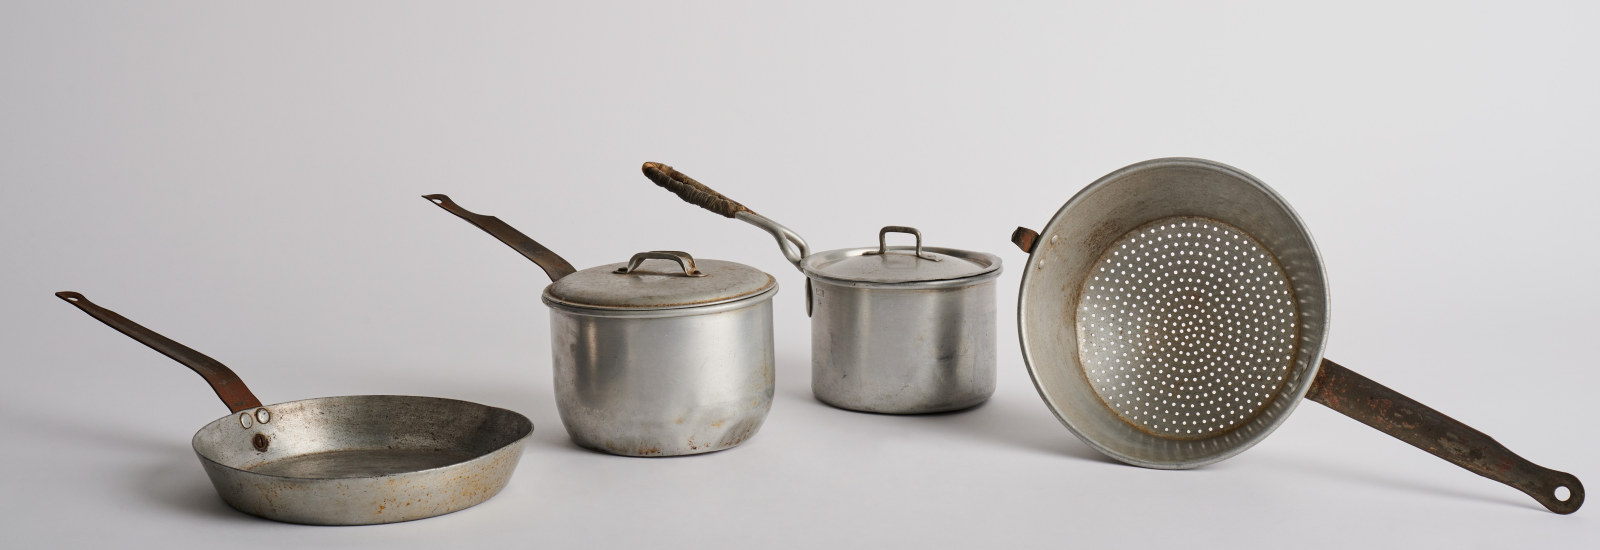 Cookware from No. 60 Gloucester Street, The Rocks, maker unknown, 1940, aluminium 